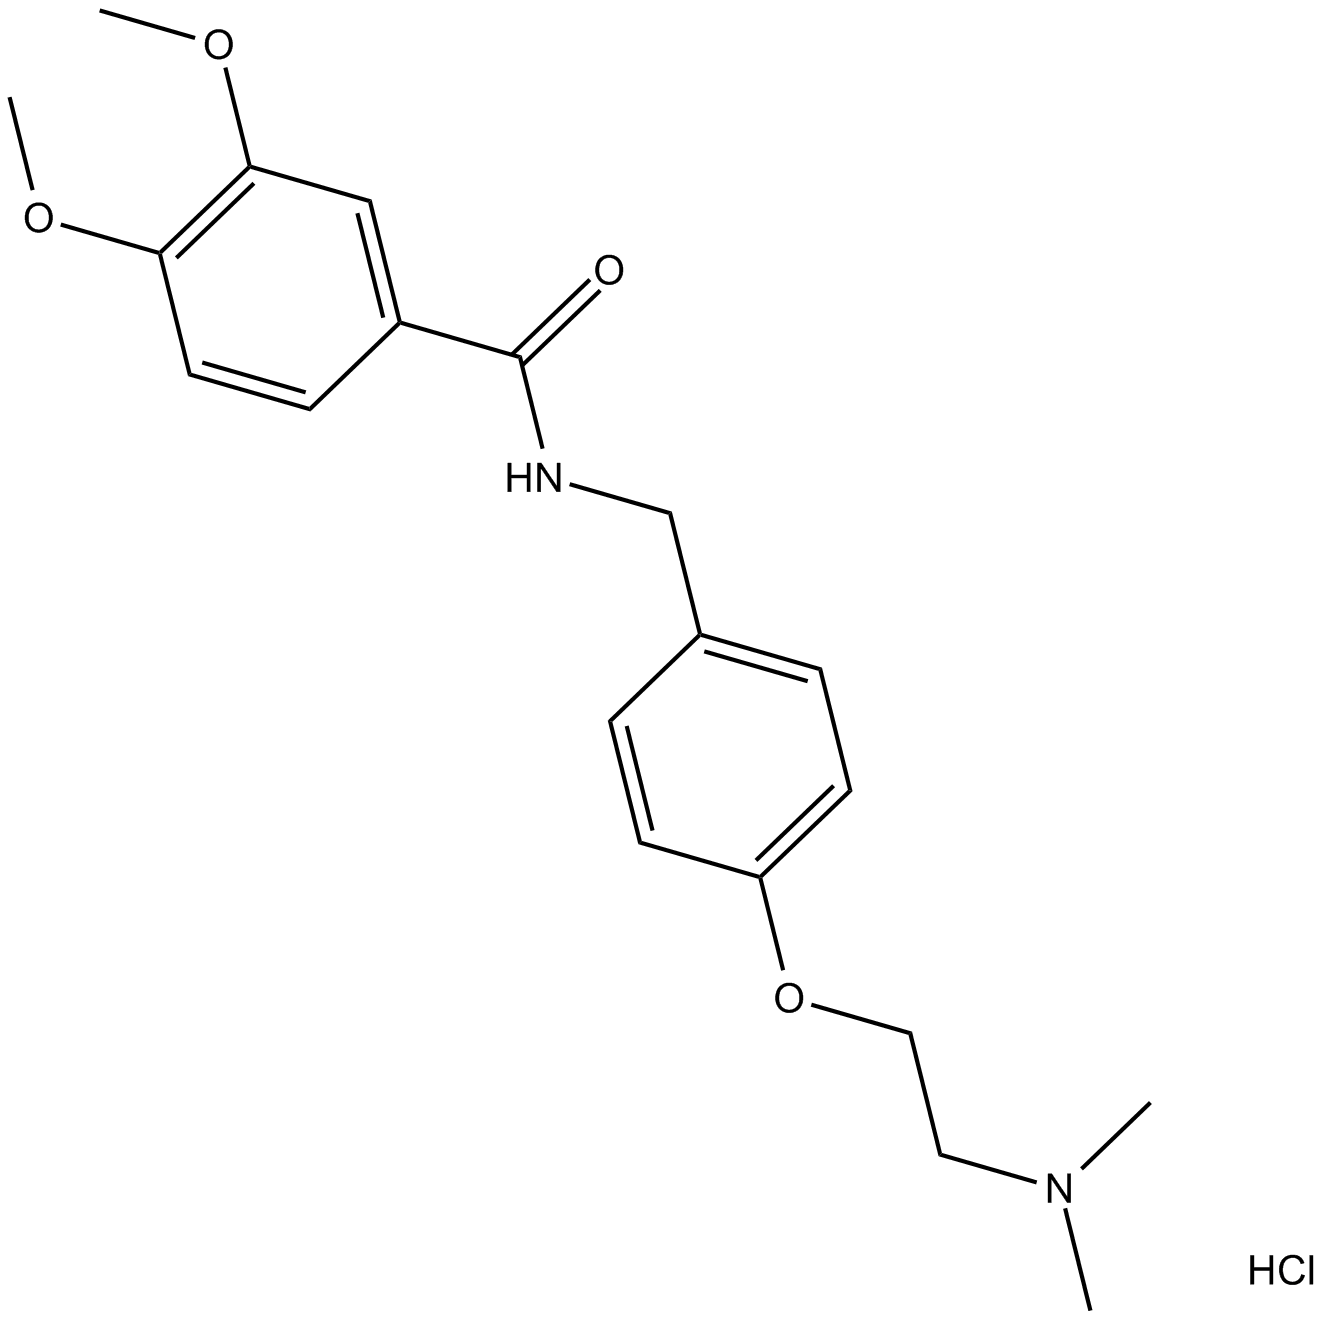 Itopride hydrochloride  Chemical Structure